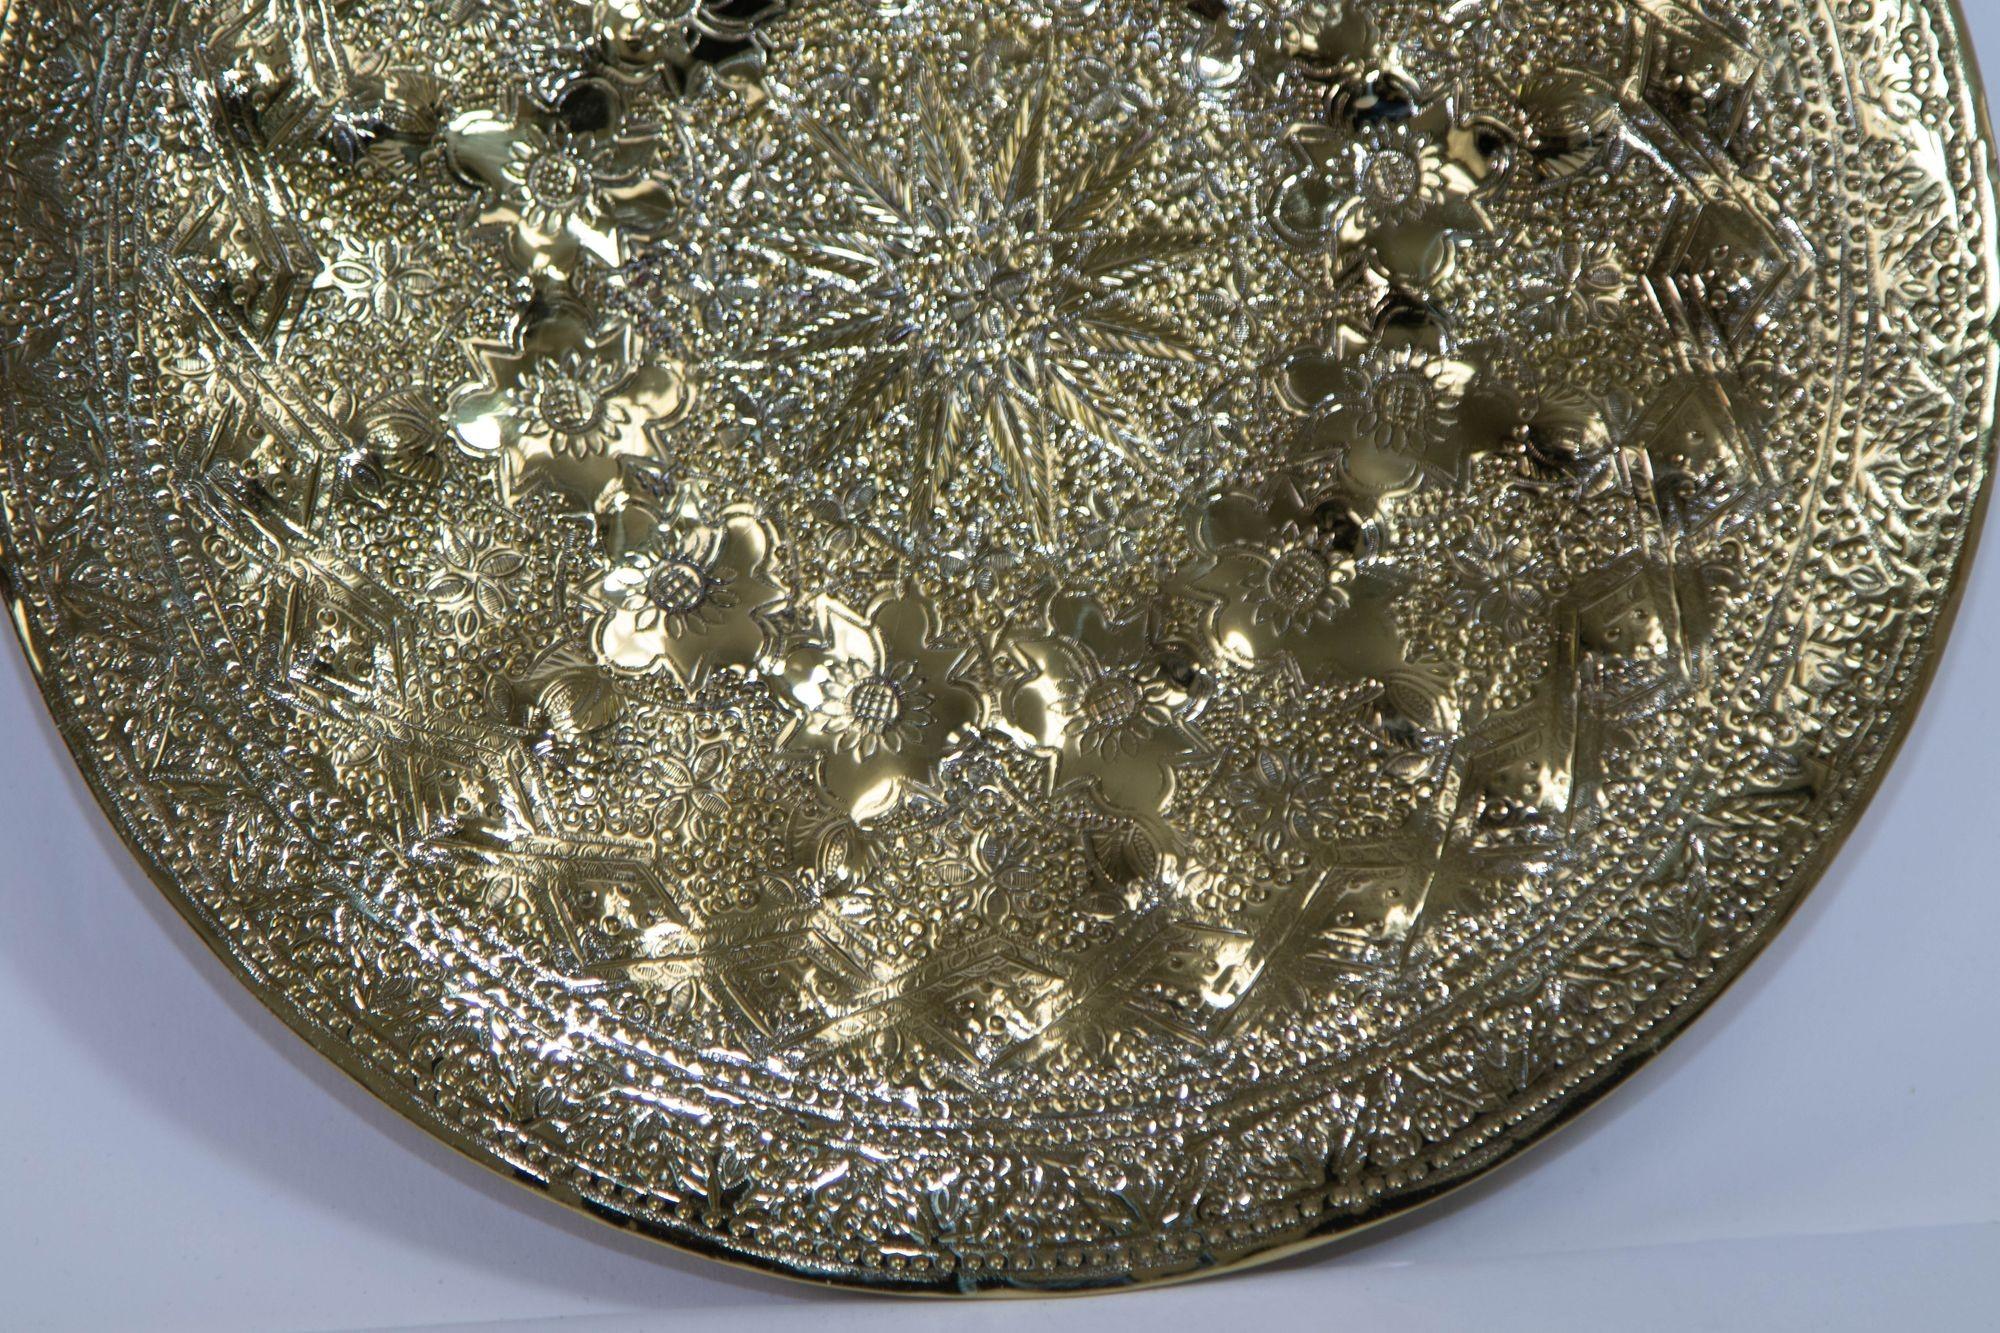 Asian Islamic Persian Polished Brass Tray Collectible Metal Work Platter 10 inches D. For Sale